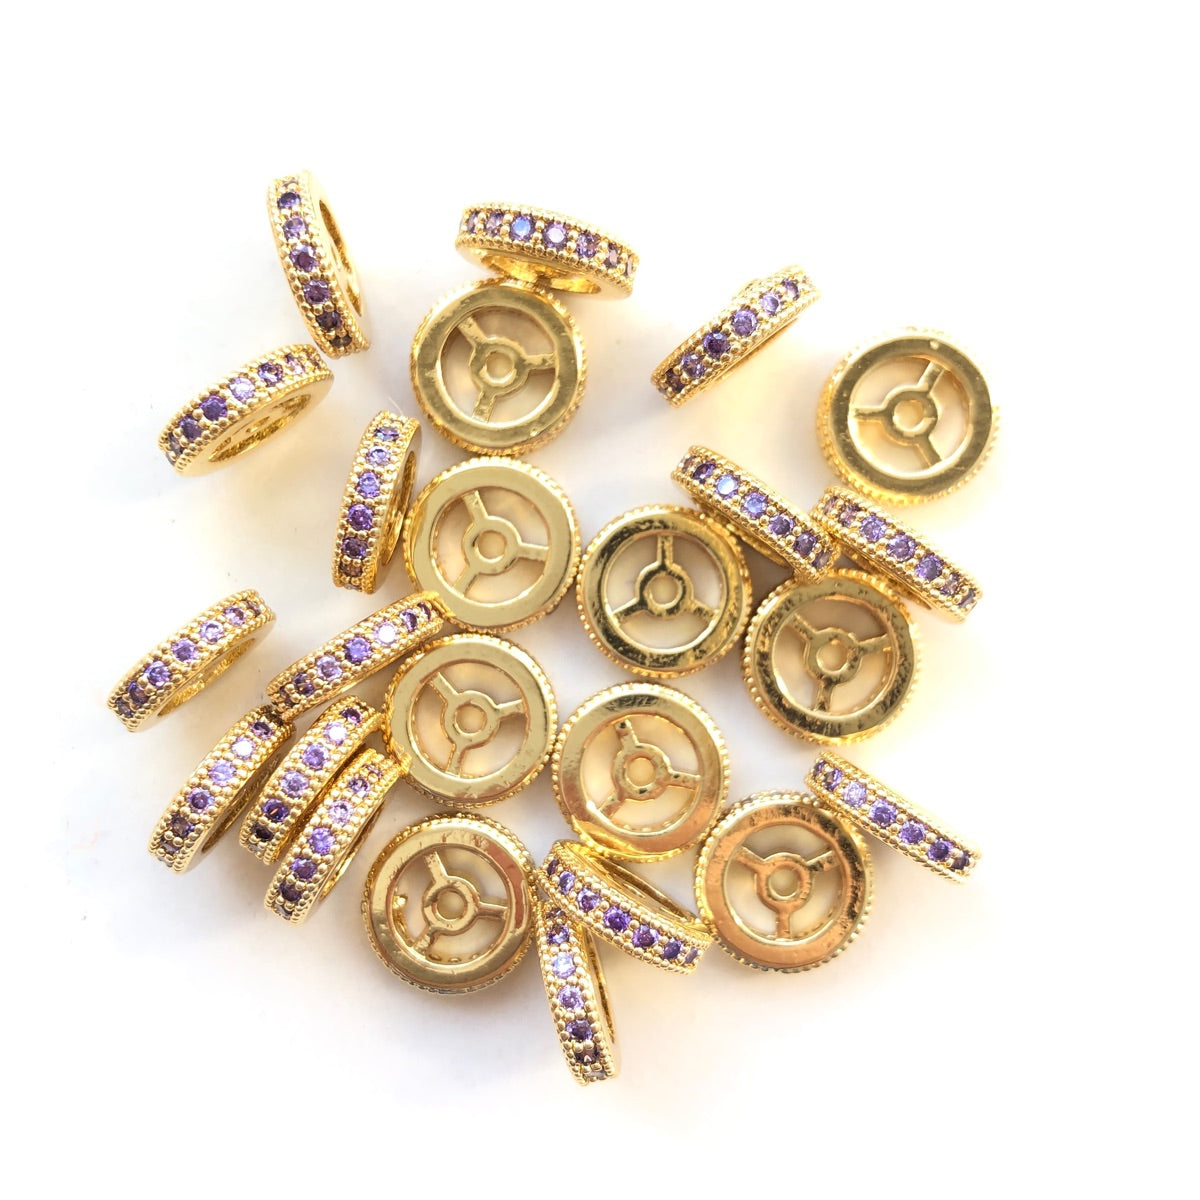 20pcs/lot 9.6/12mm Purple CZ Paved Wheel Rondelle Spacers Gold CZ Paved Spacers New Spacers Arrivals Rondelle Beads Charms Beads Beyond